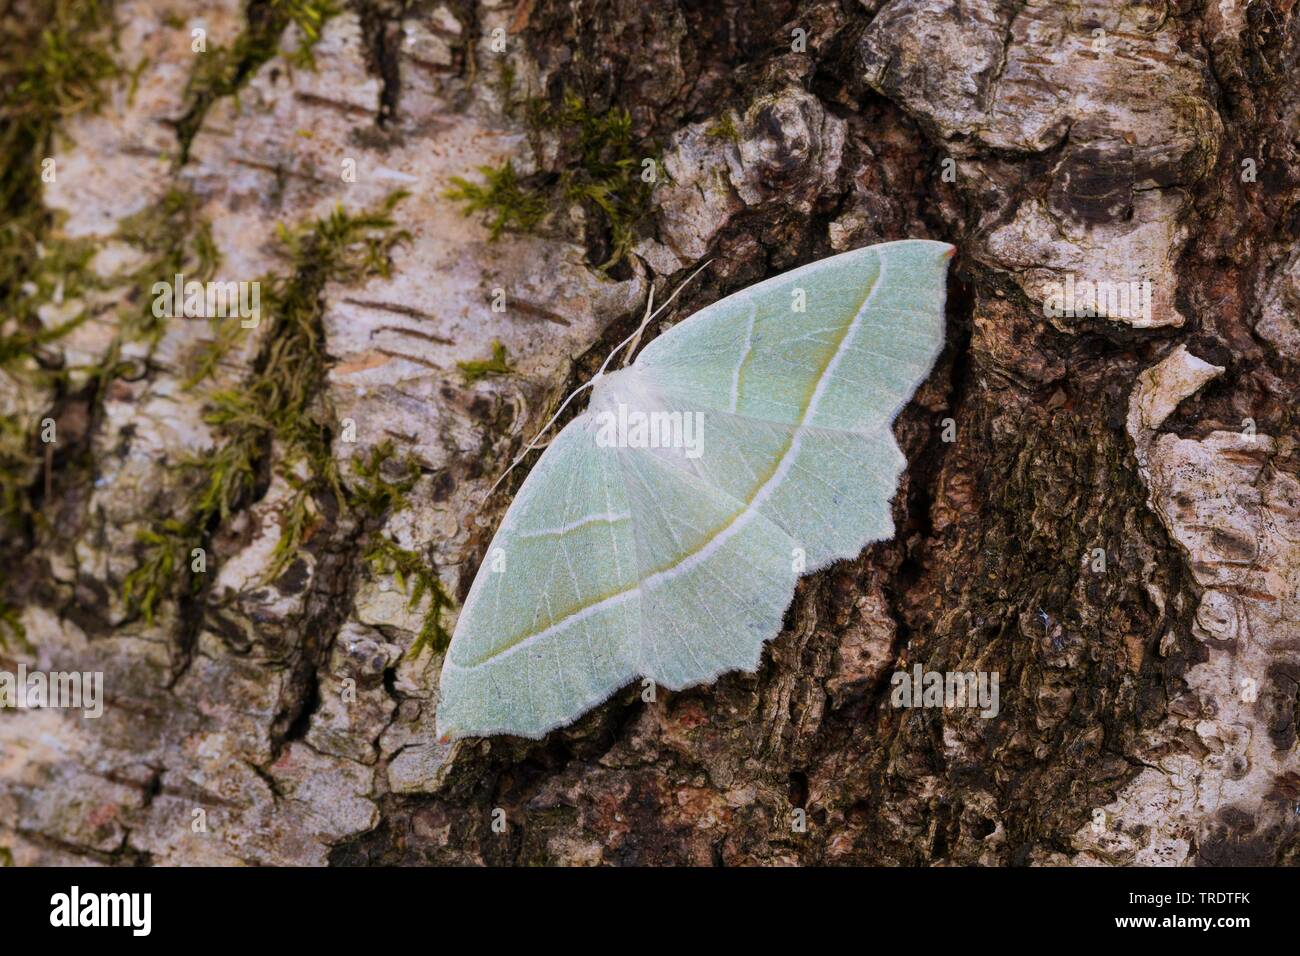 Light Emerald (Campaea margaritaria, Campaea margaritata), female sitting on birch bark, view from above, Germany Stock Photo